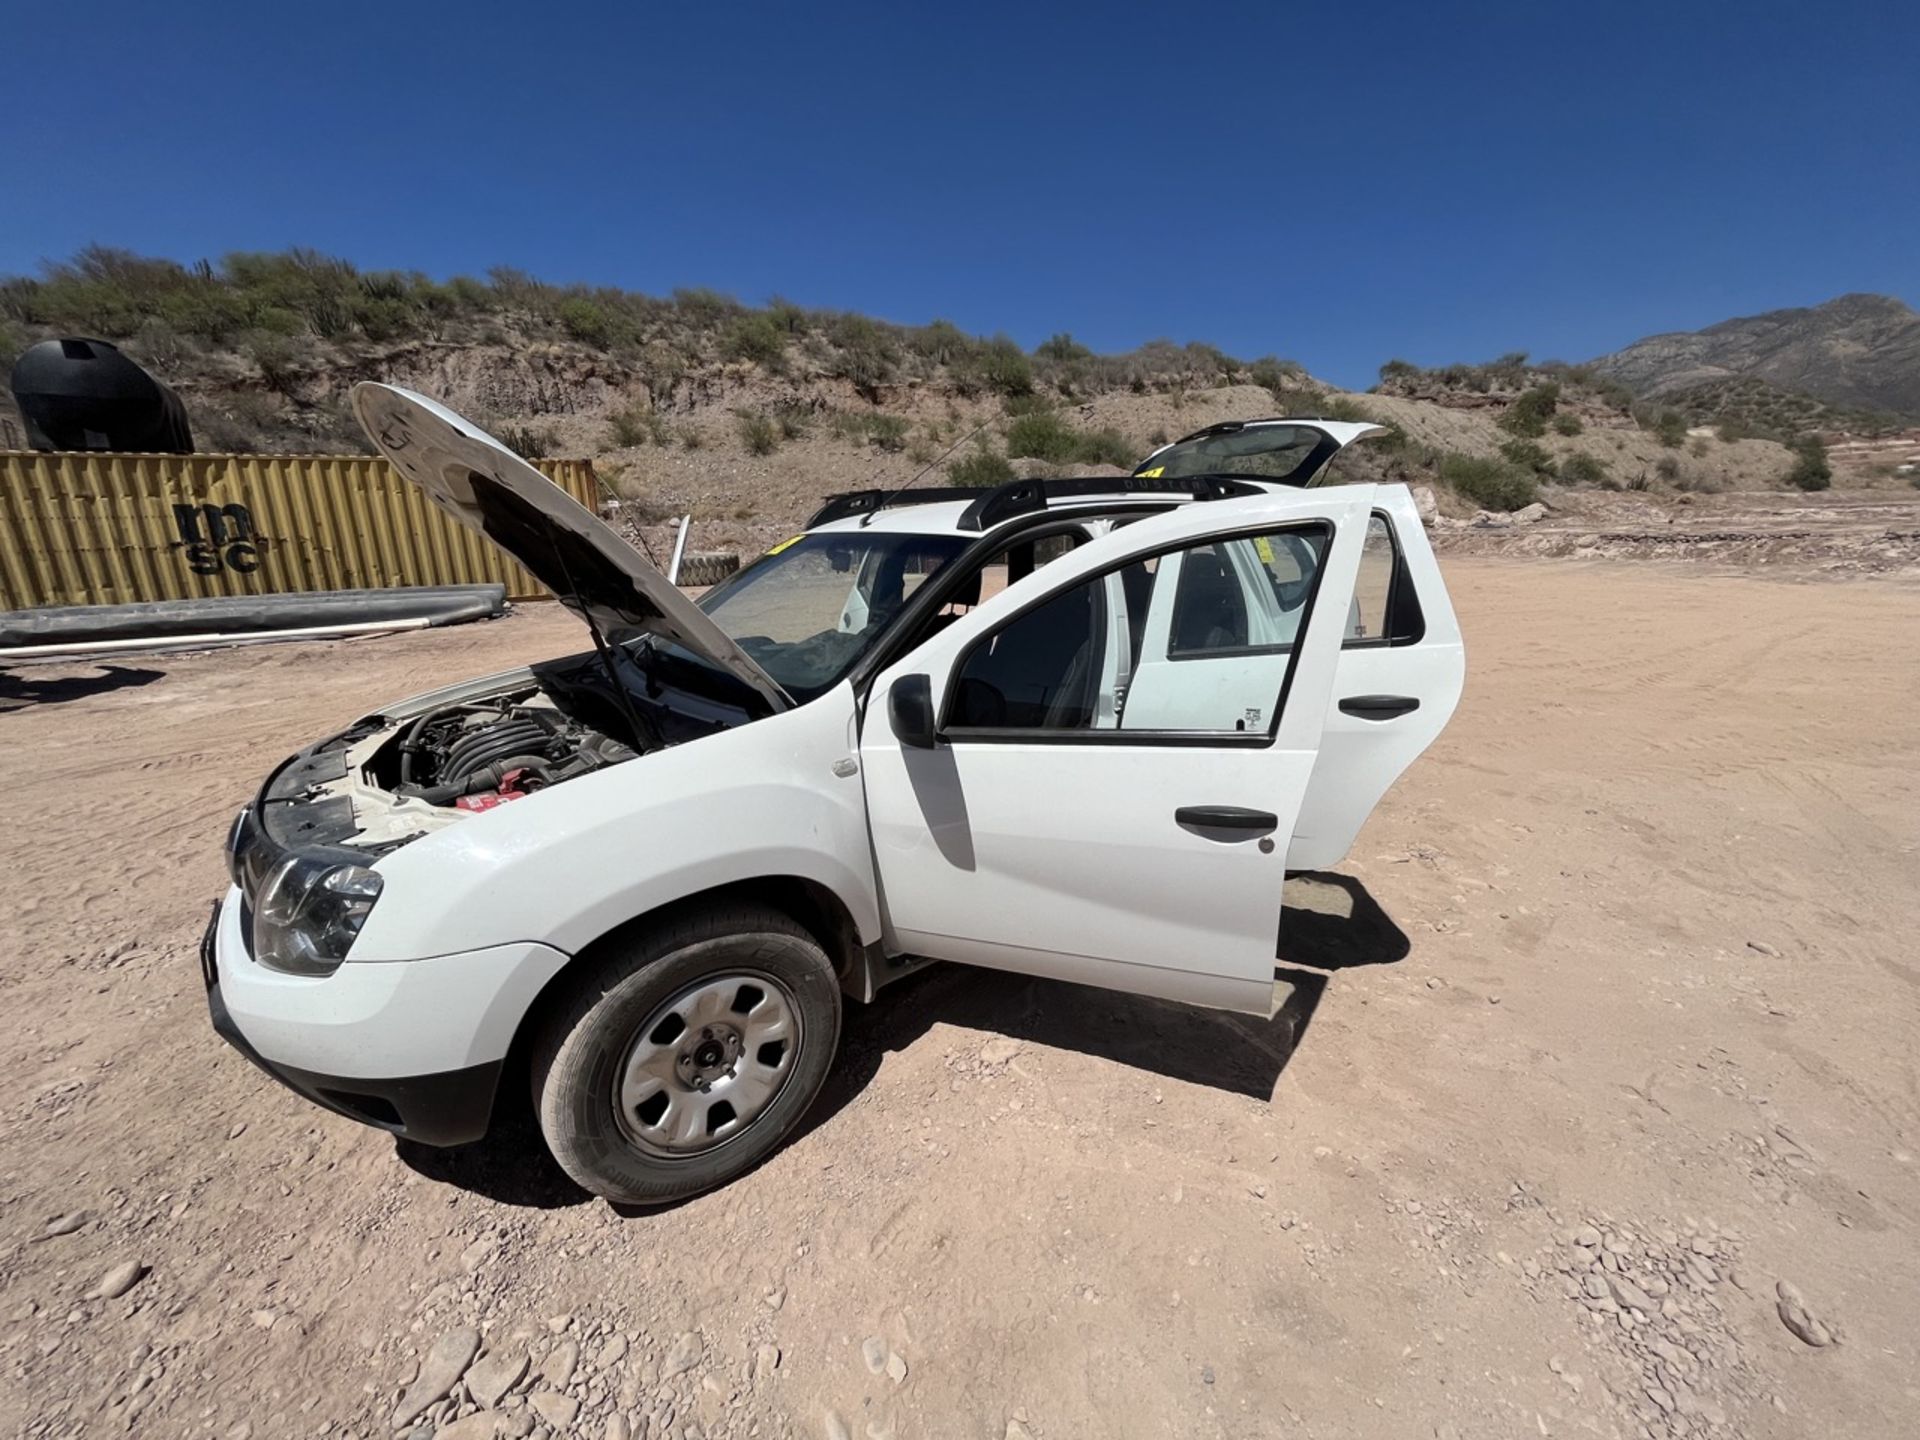 Renault Duster white vehicle, Series 9FBHS1FH4HM590467, Model 2017, automatic transmission, electr - Image 23 of 98